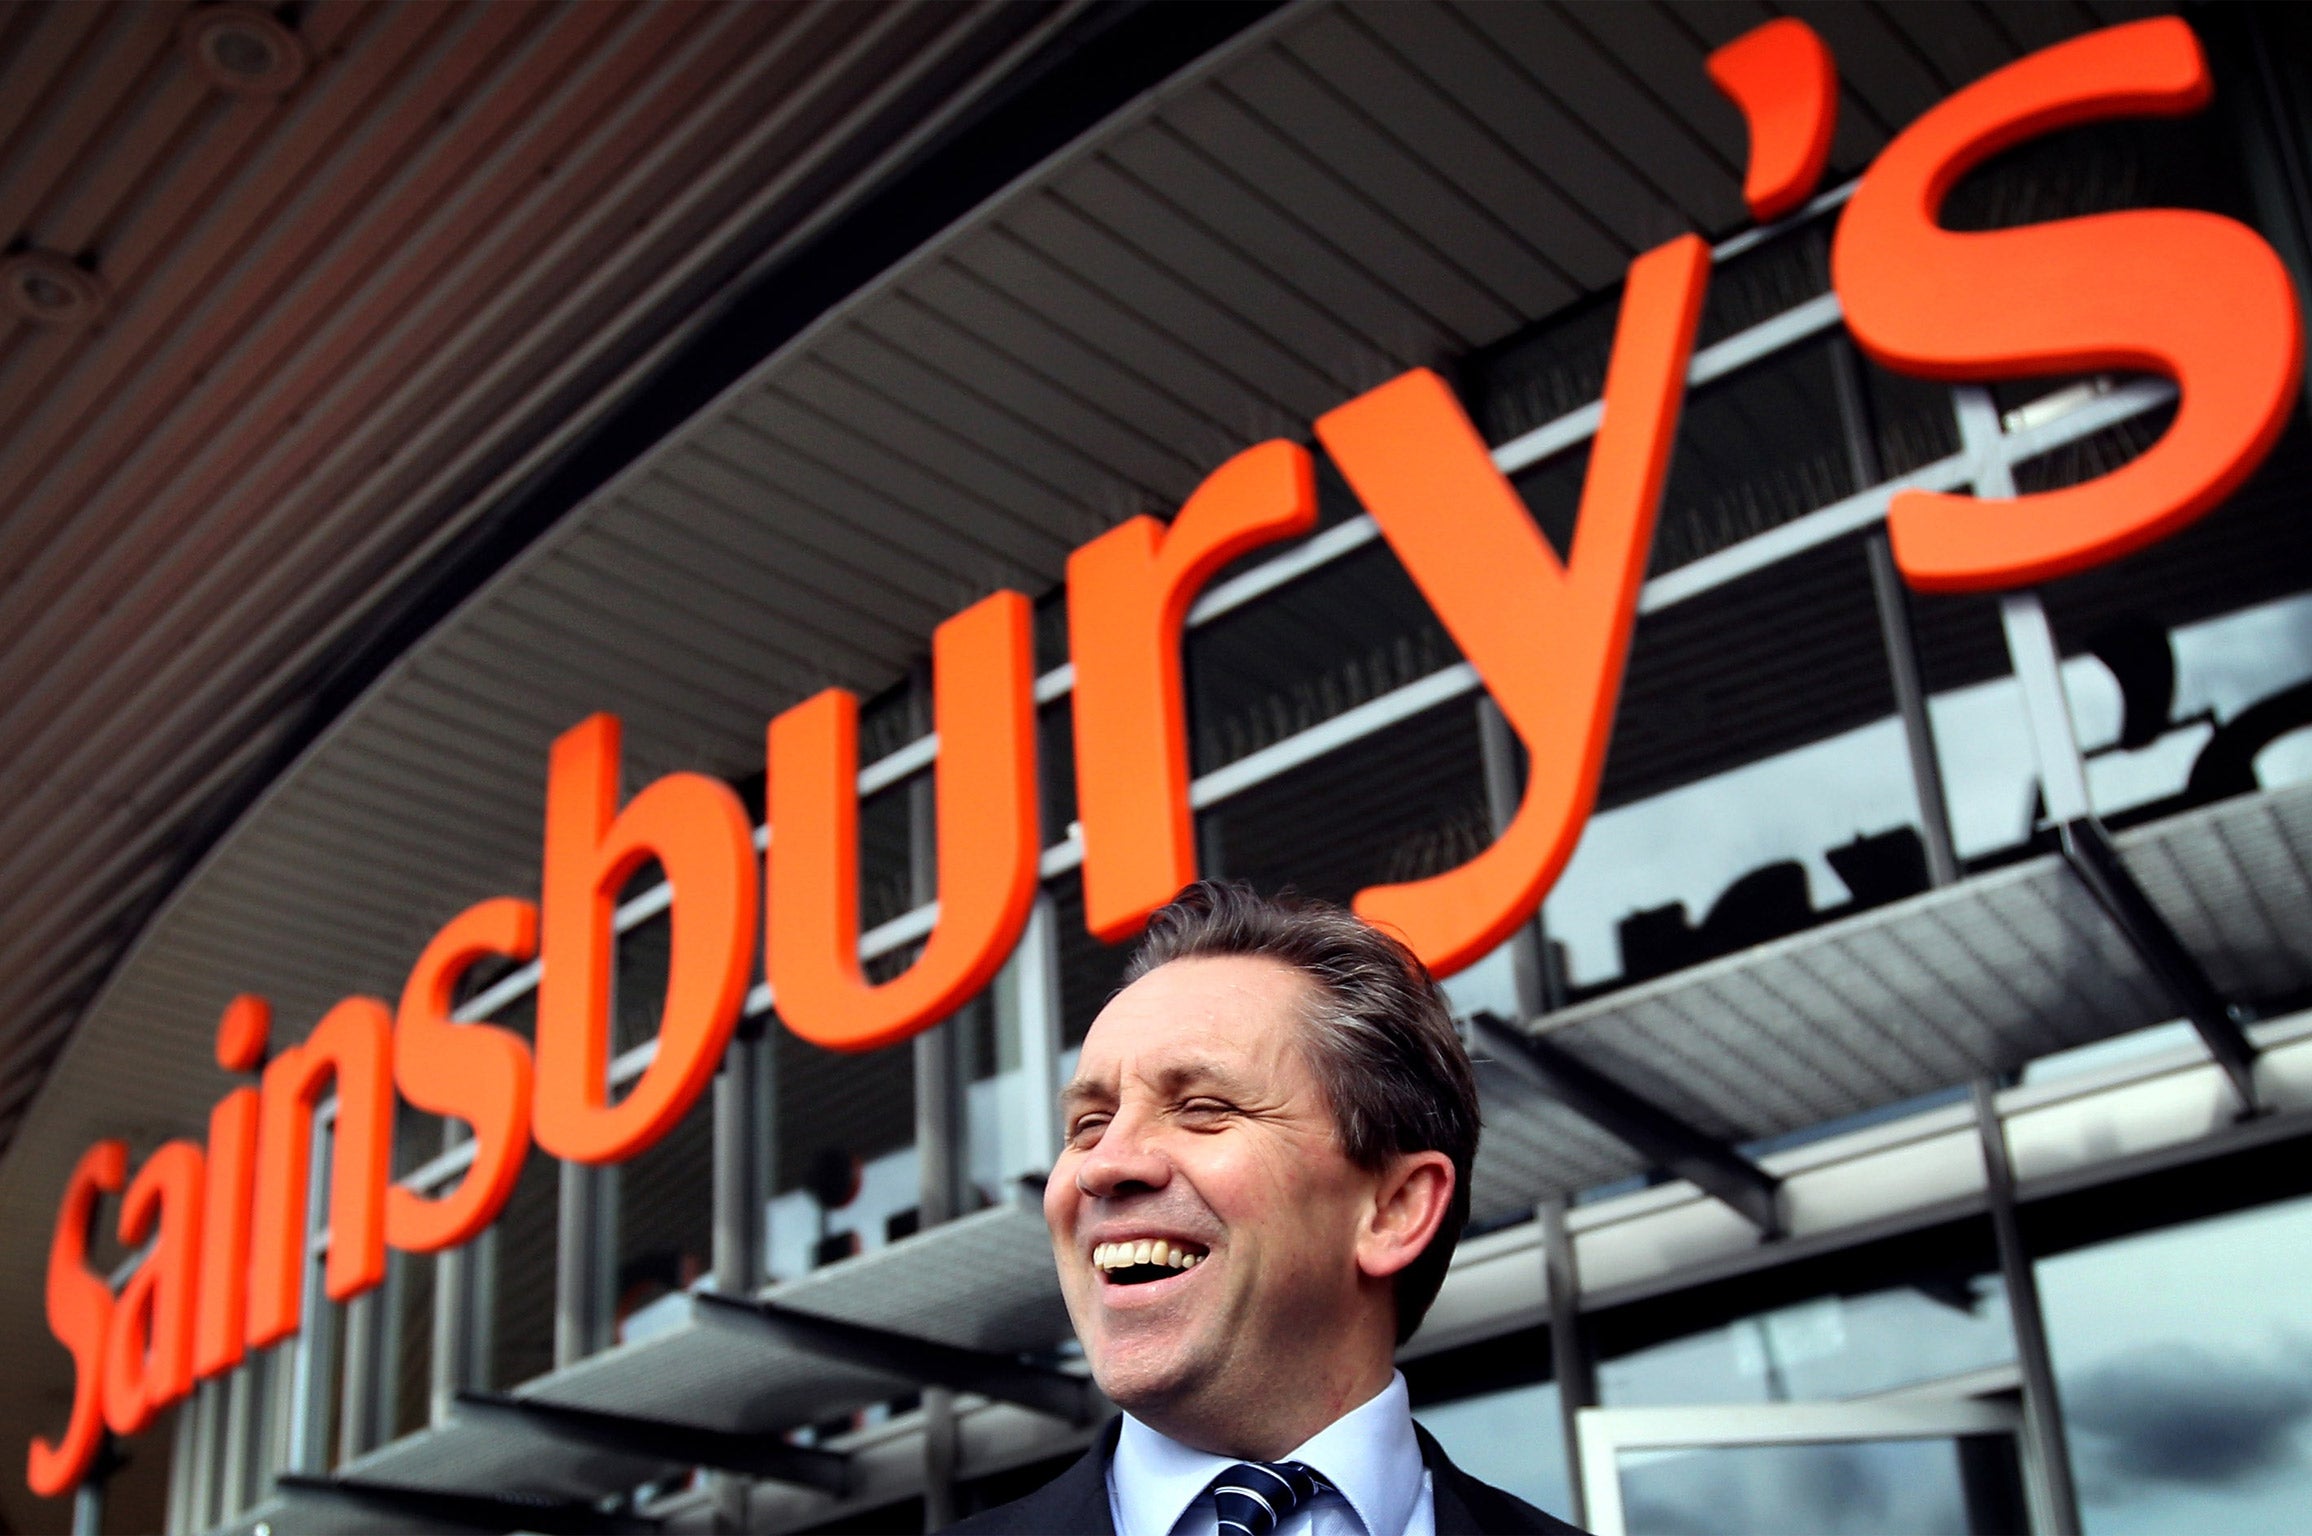 Justin King, the former Sainsbury’s chief, was well liked in the City